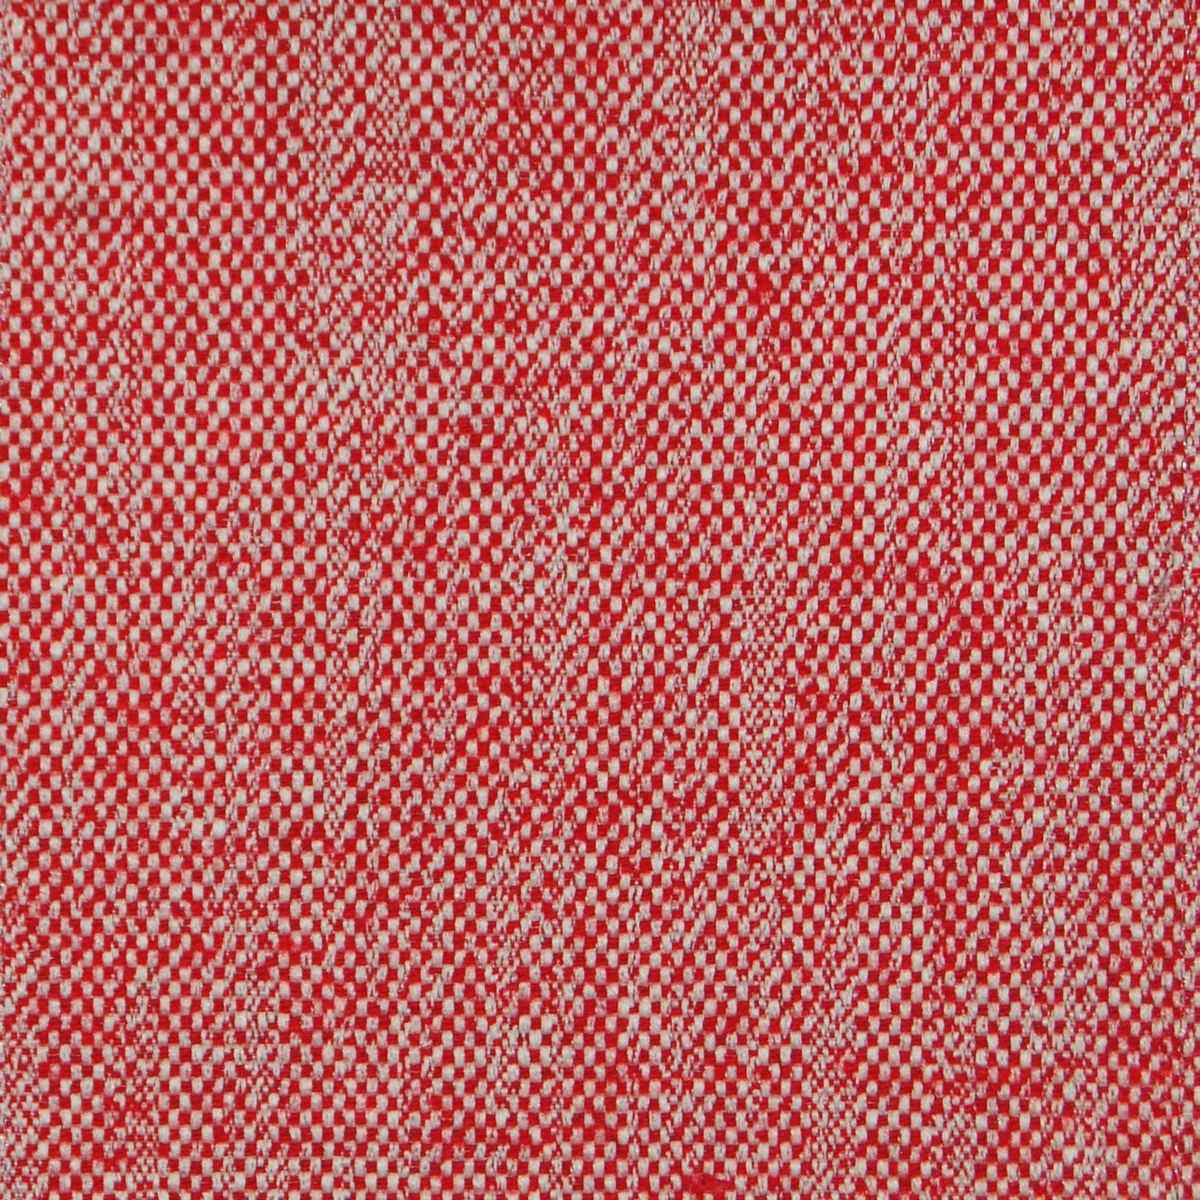 Selkirk Strawberry Fabric by Voyage Maison